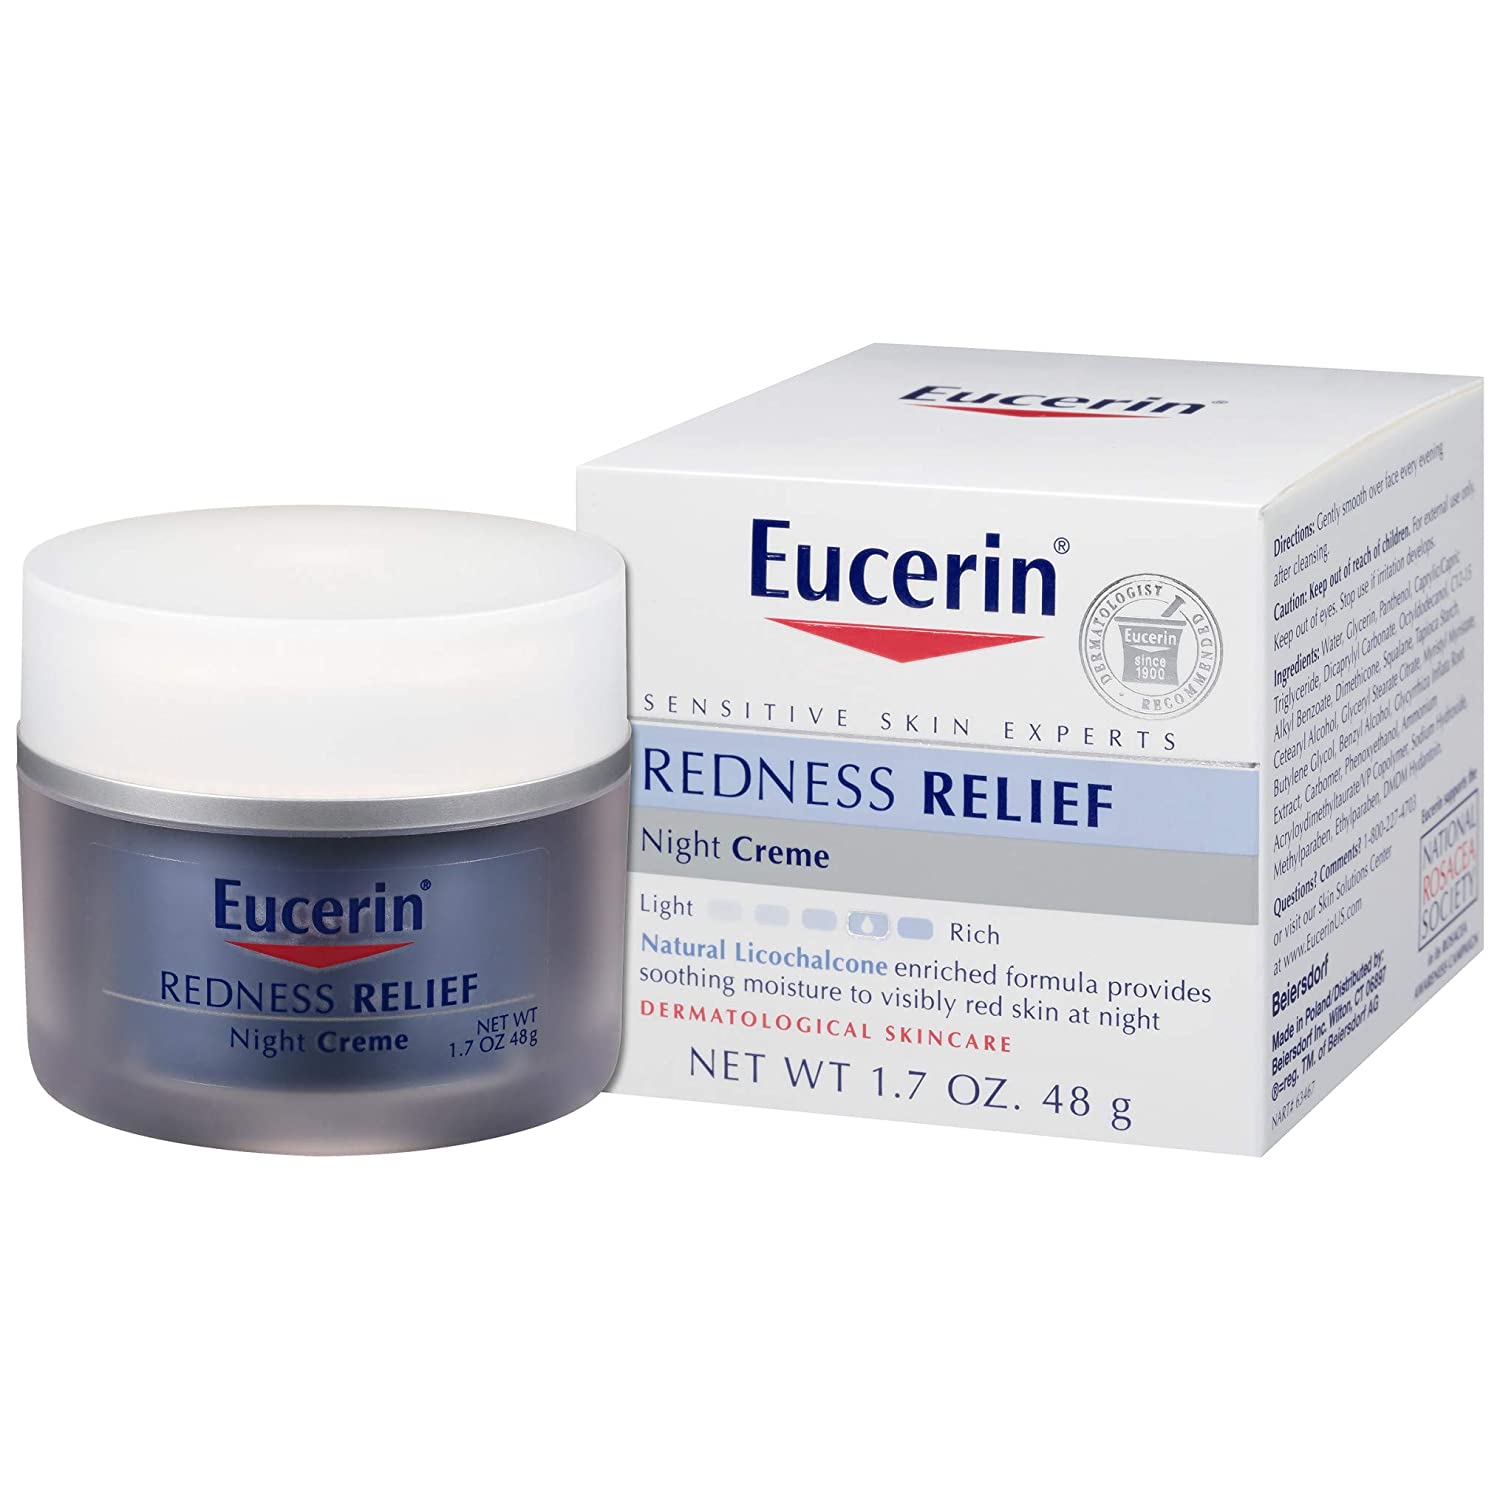 eucerin redness relief moisturizer tub next to the box on a white background